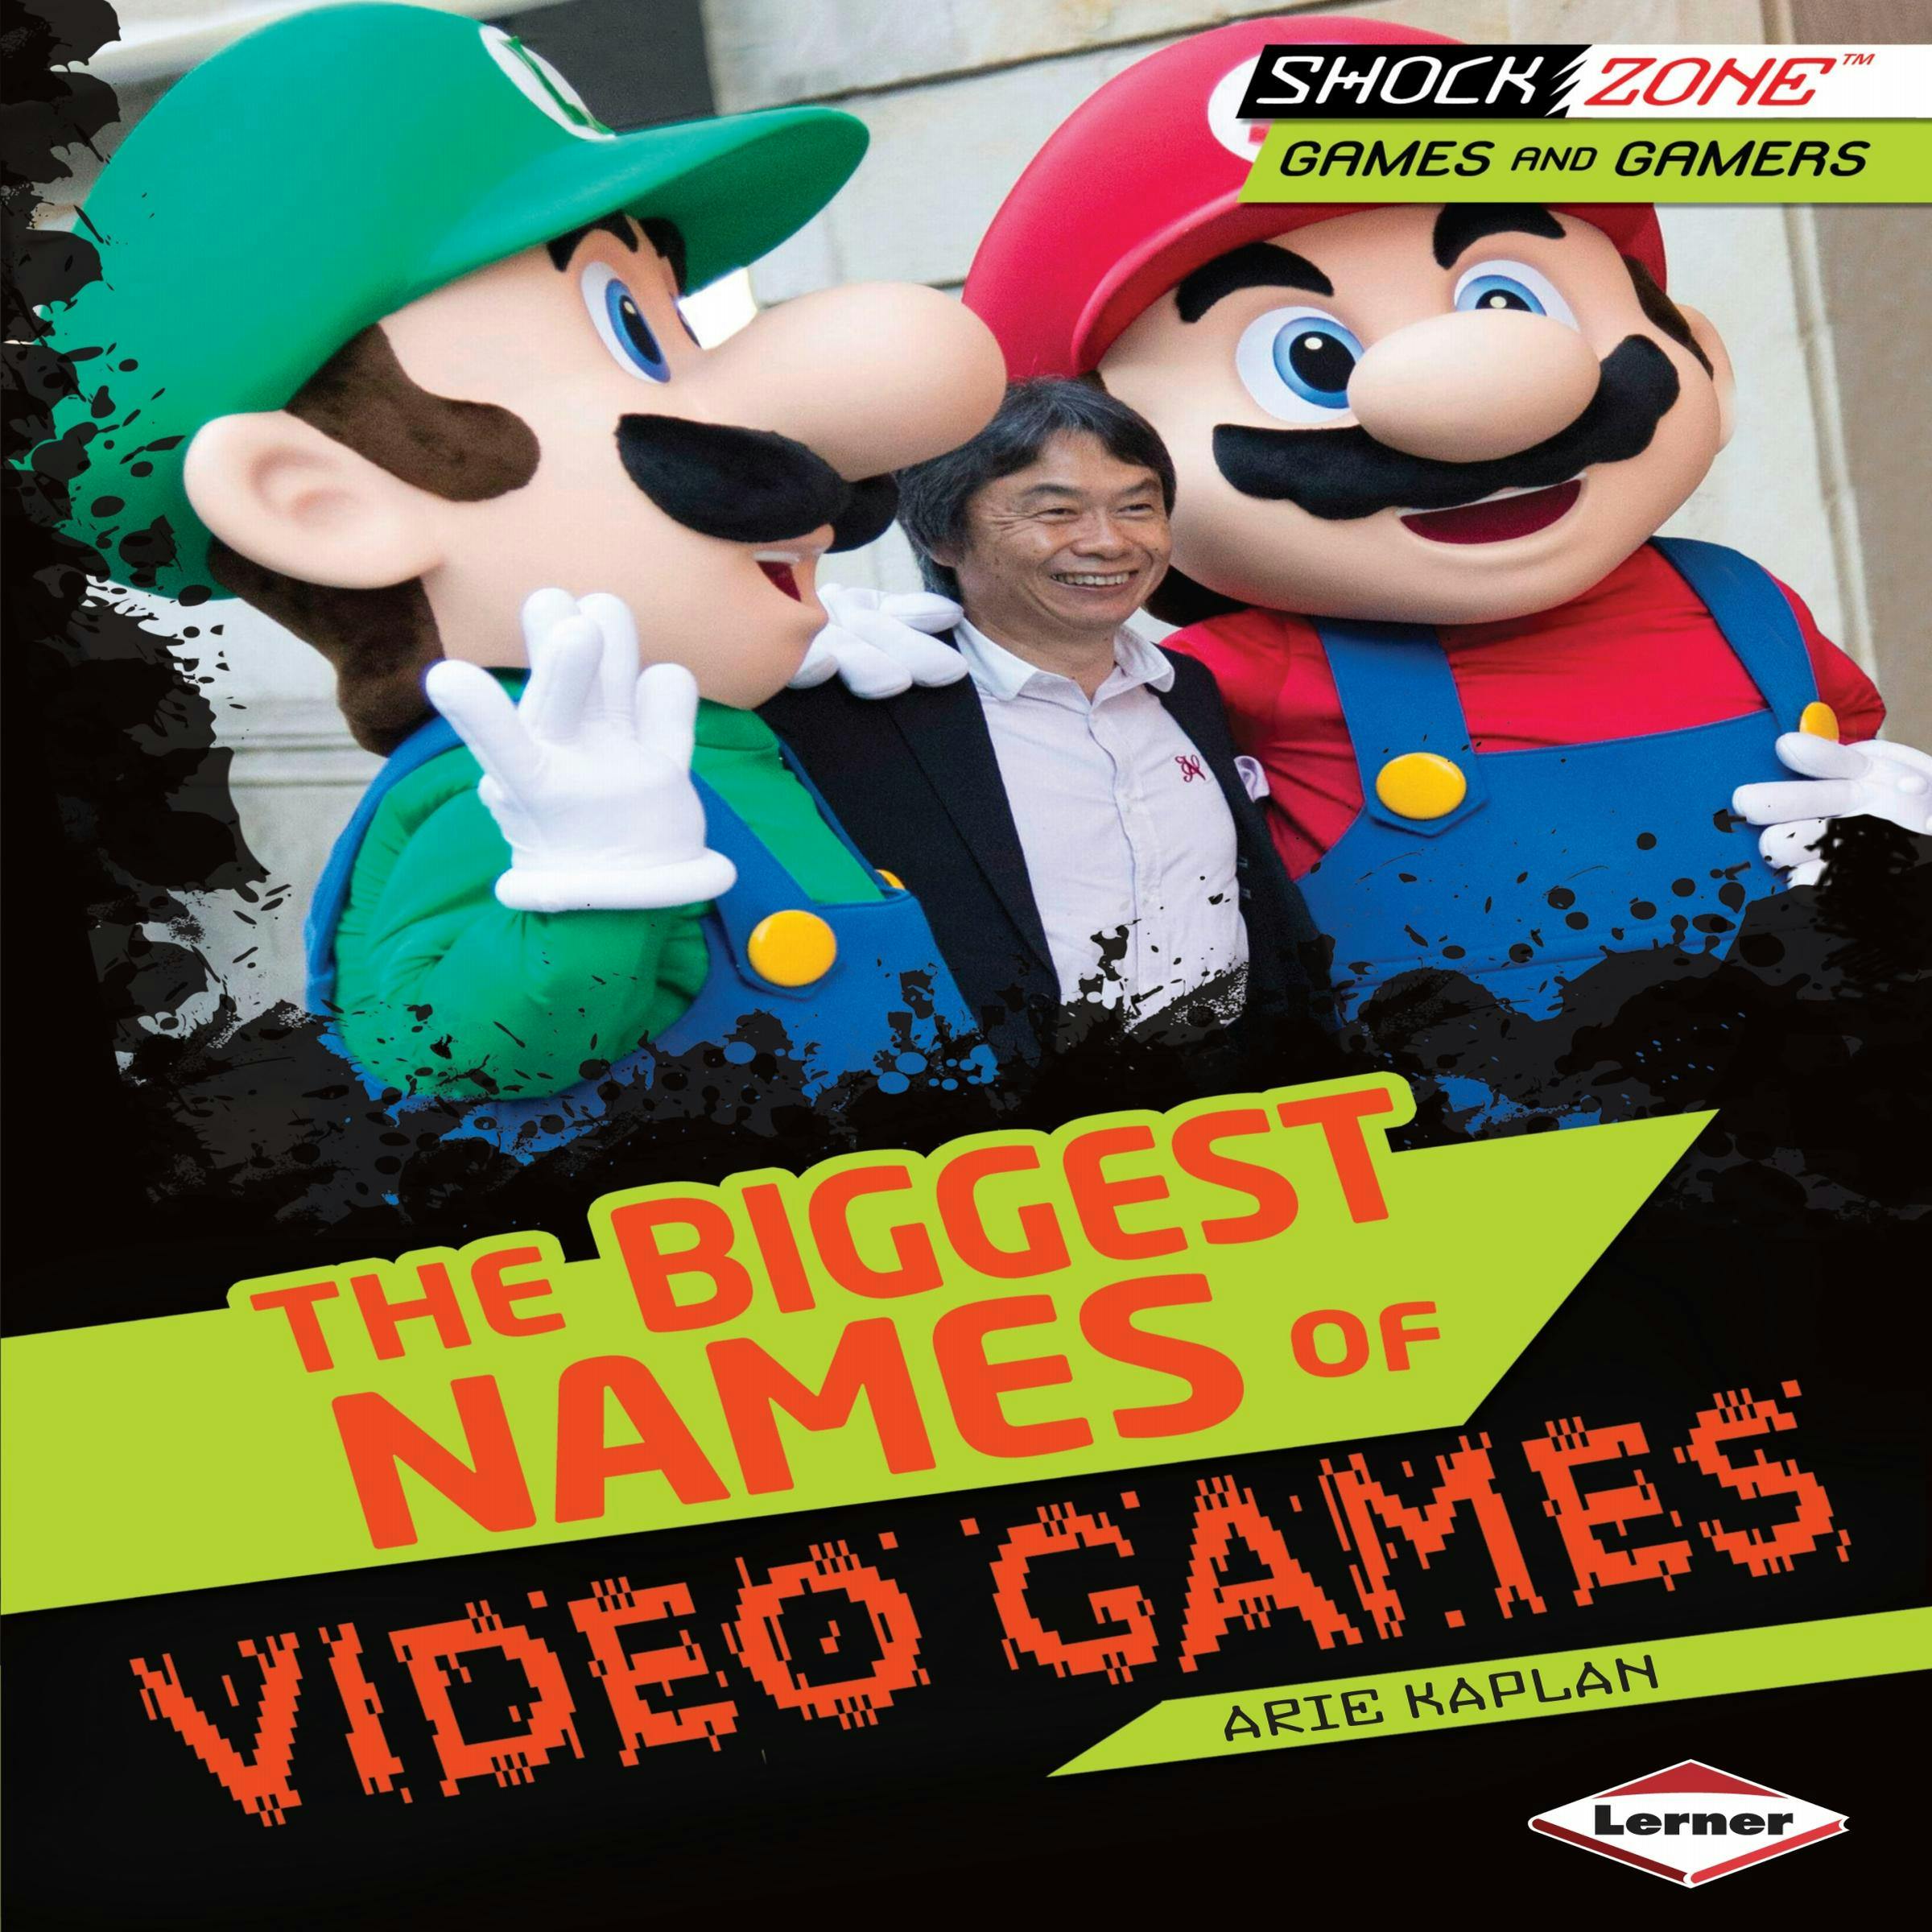 The Biggest Names of Video Games - undefined